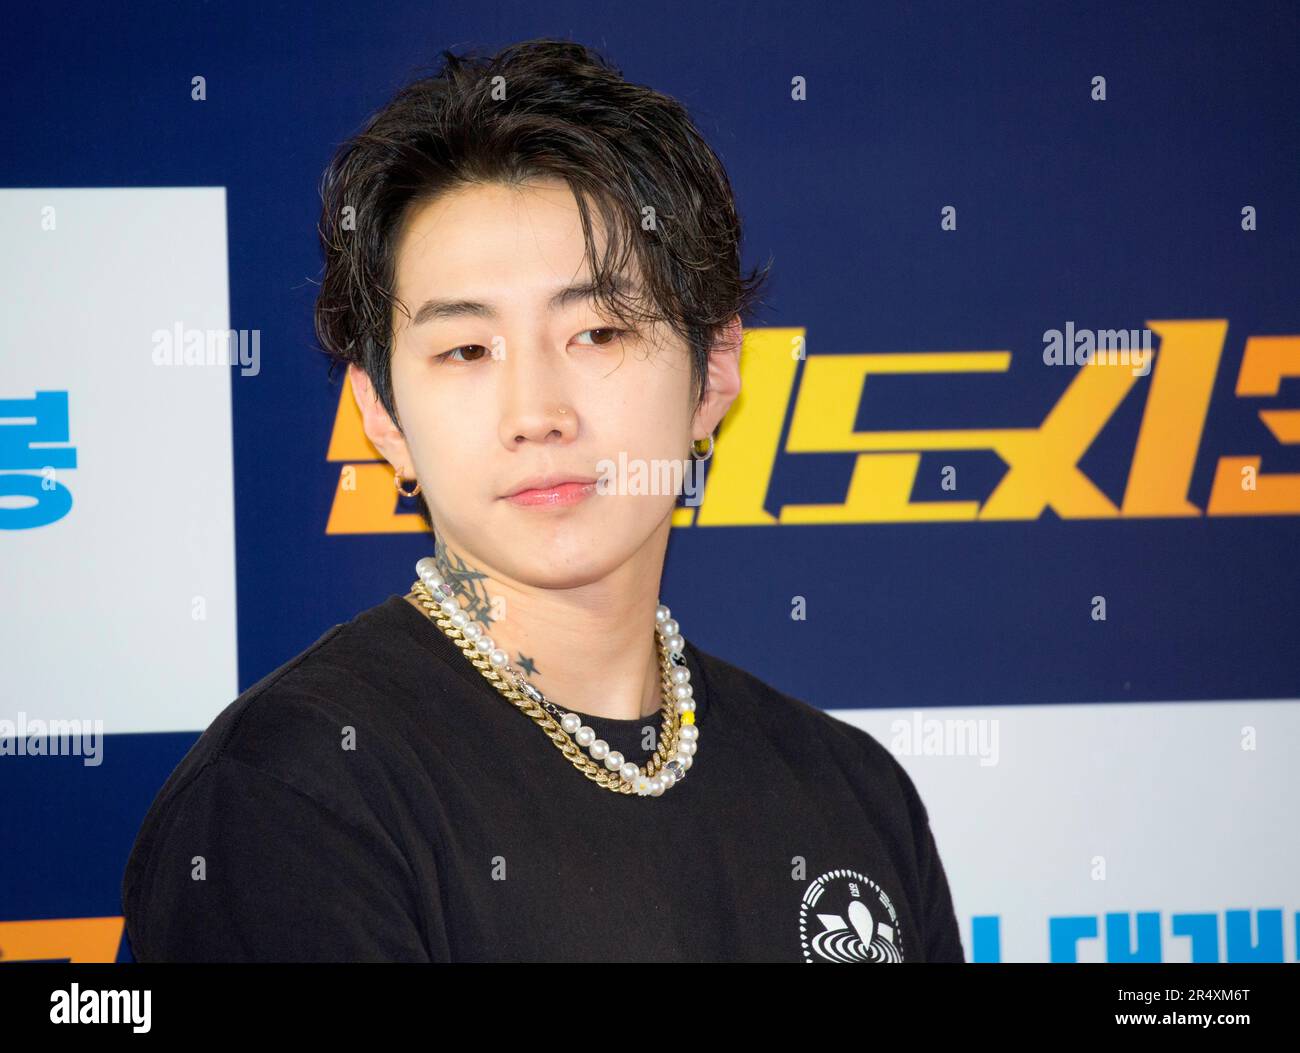 Jay Park, May 22, 2023 : American singer Jay Park attends a photocall before a VIP preview of South Korean movie 'The Roundup: No Way Out' in Seoul, South Korea. 'The Roundup: No Way Out', the third installment of 'The Outlaws' series will hit local theaters on May 31. Credit: Lee Jae-Won/AFLO/Alamy Live News Stock Photo